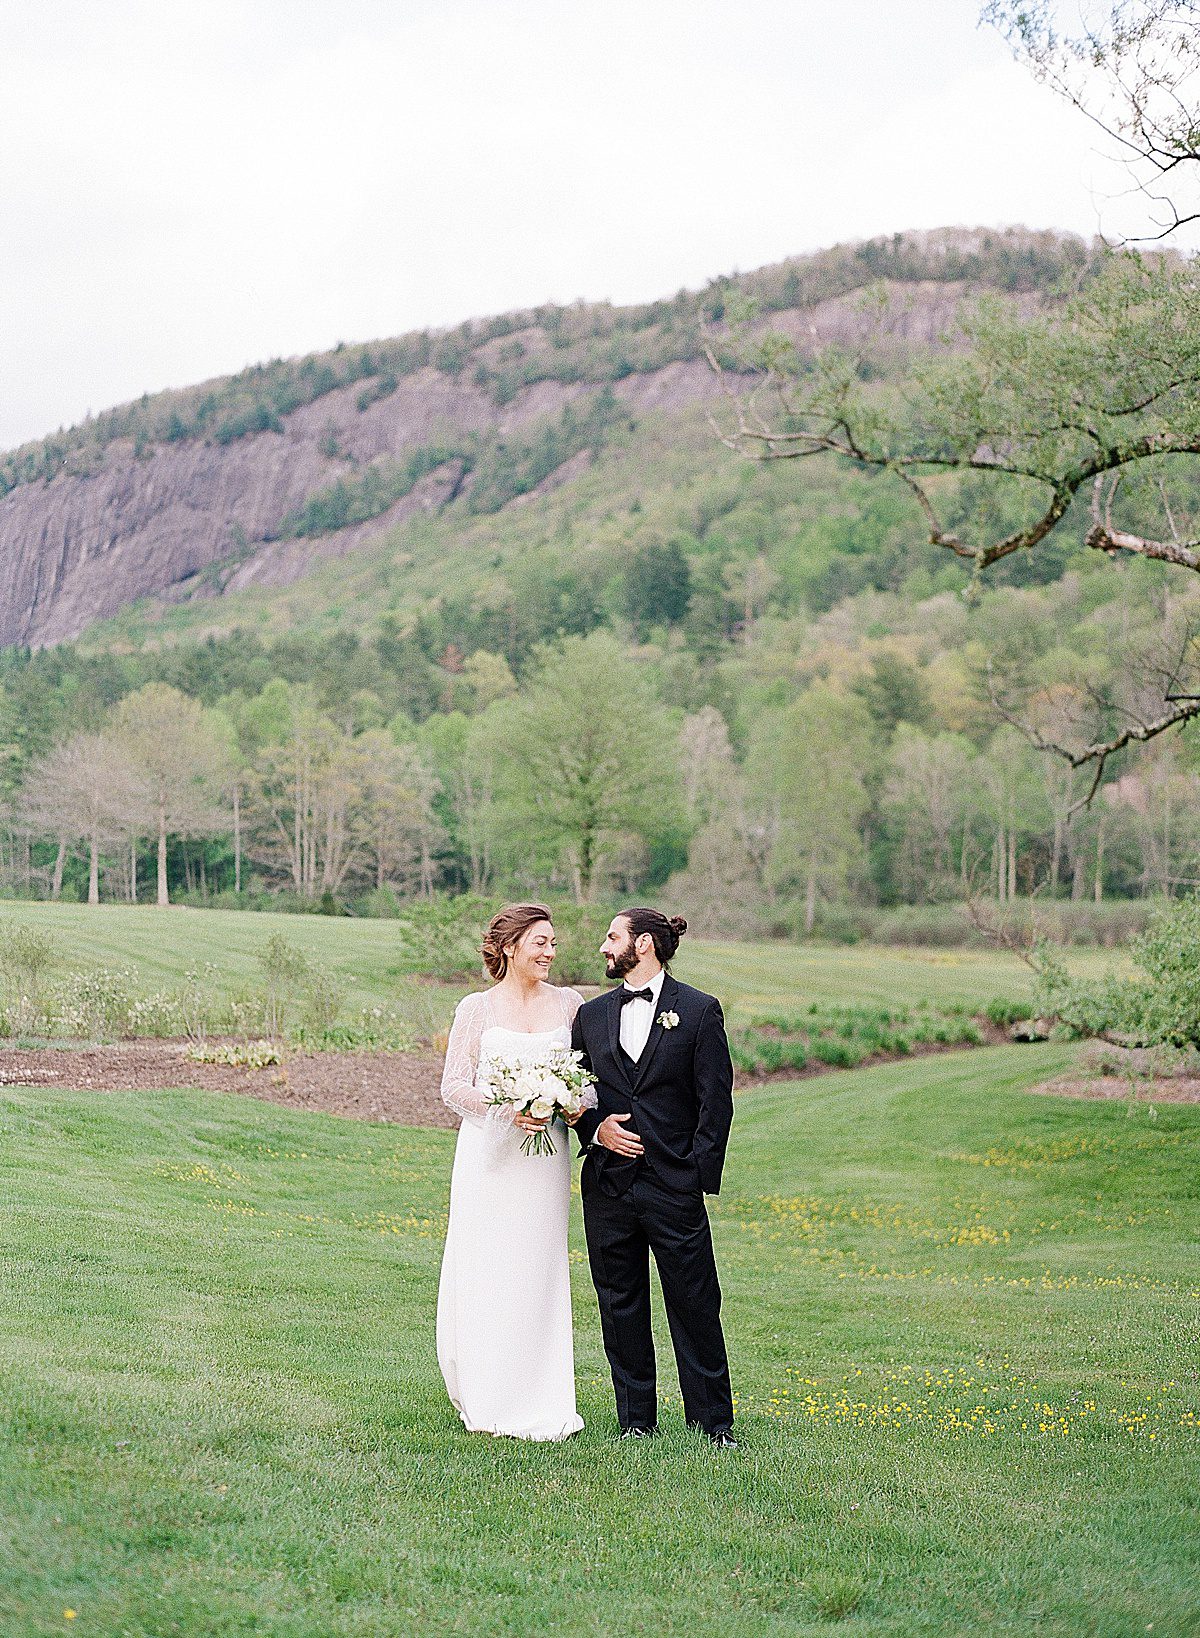 Bride and Groom Arm in Arm in Lonesome Valley Cashiers NC Photo